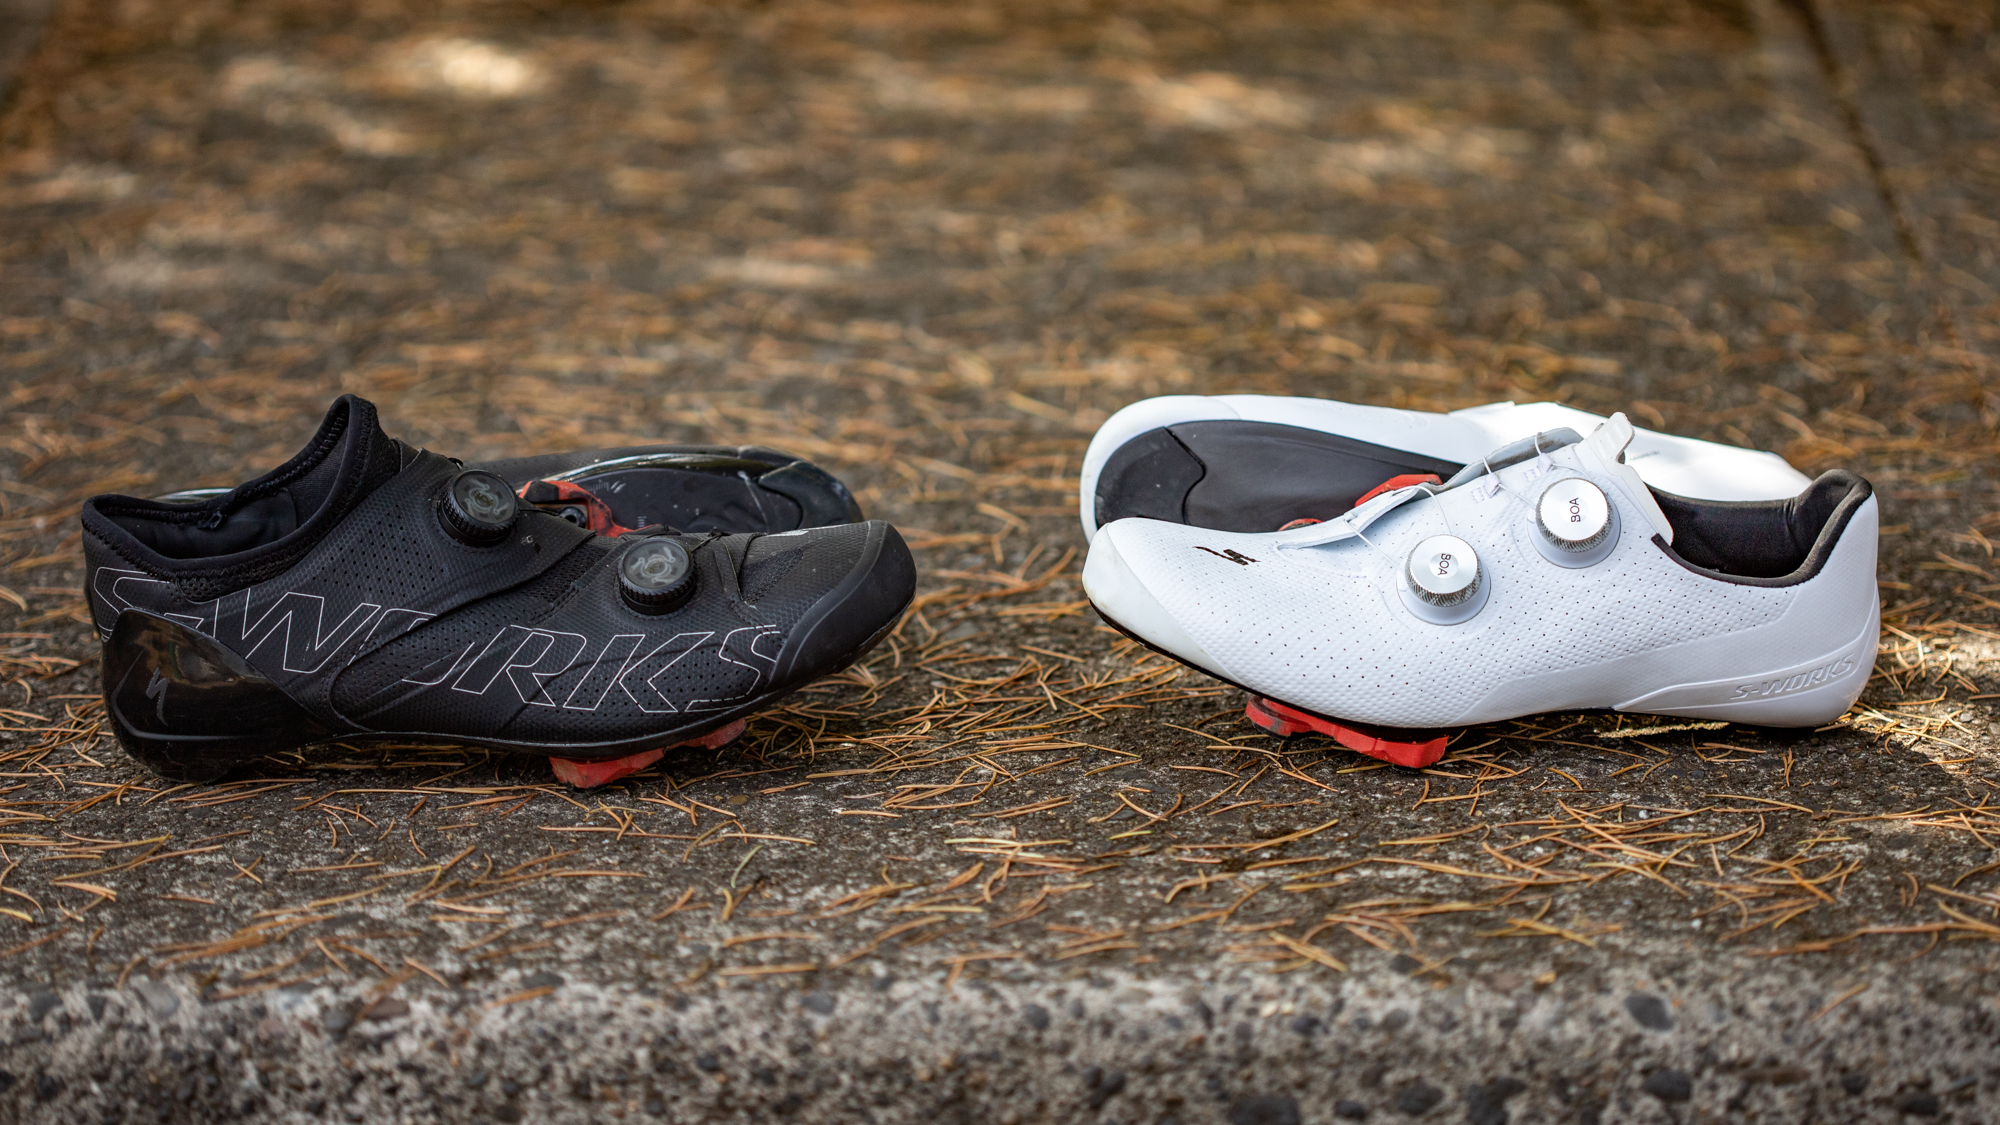 Power transfer or all-round comfort and style? S-Works Ares vs Torch head to head